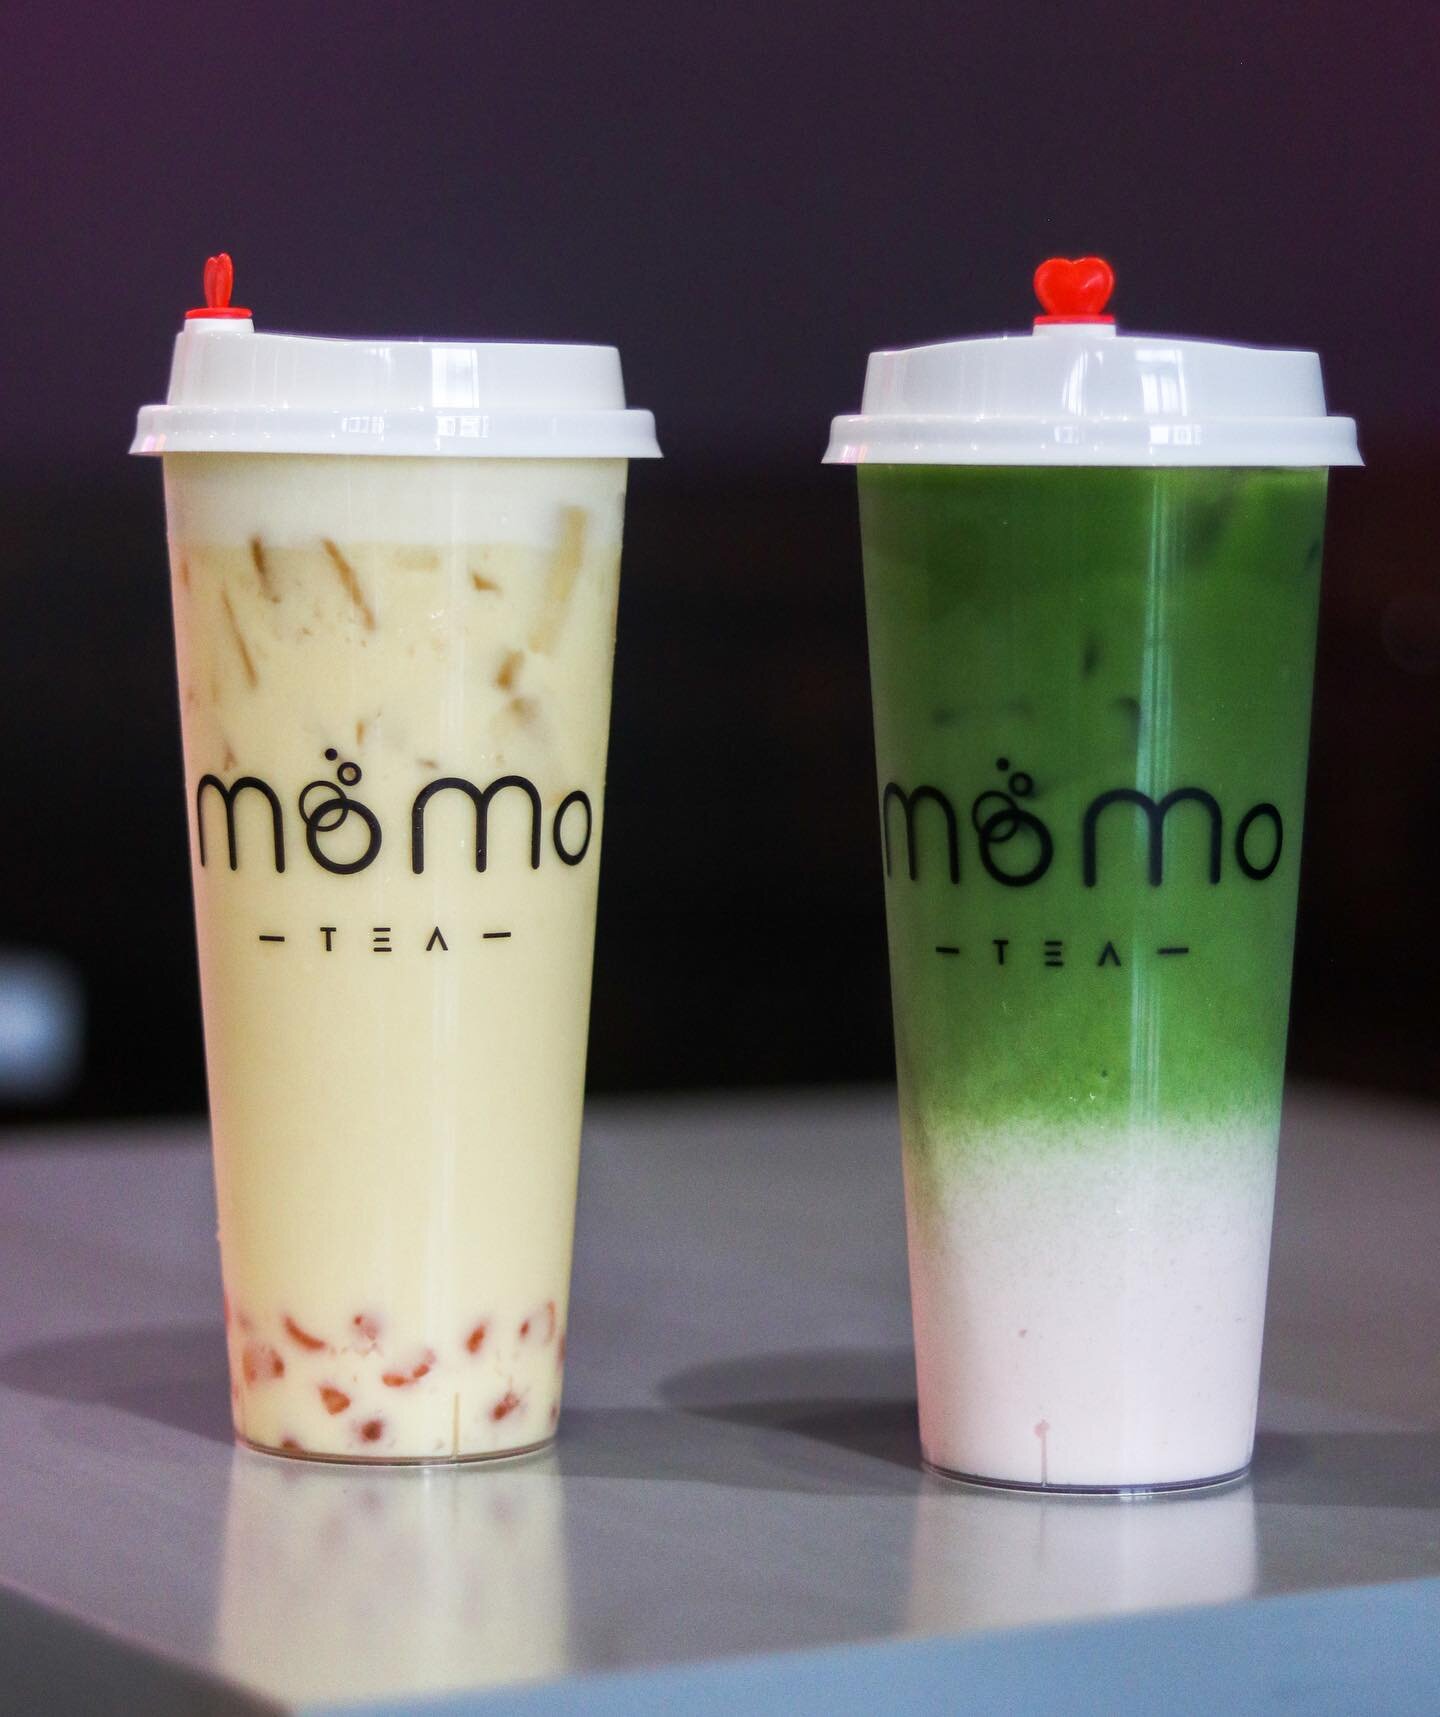 Do you prefer fruit milk teas 🥭 or floral milk teas? 🍵

Open 11-7PM daily; we are closed on Tuesday&rsquo;s.
&bull;
&bull;
&bull;
&bull;
#momotea #momoteabr #batonrougefoodies #mochinutbr #roselatte #rosematchalatte #rosematcha #matchalovers  #bato